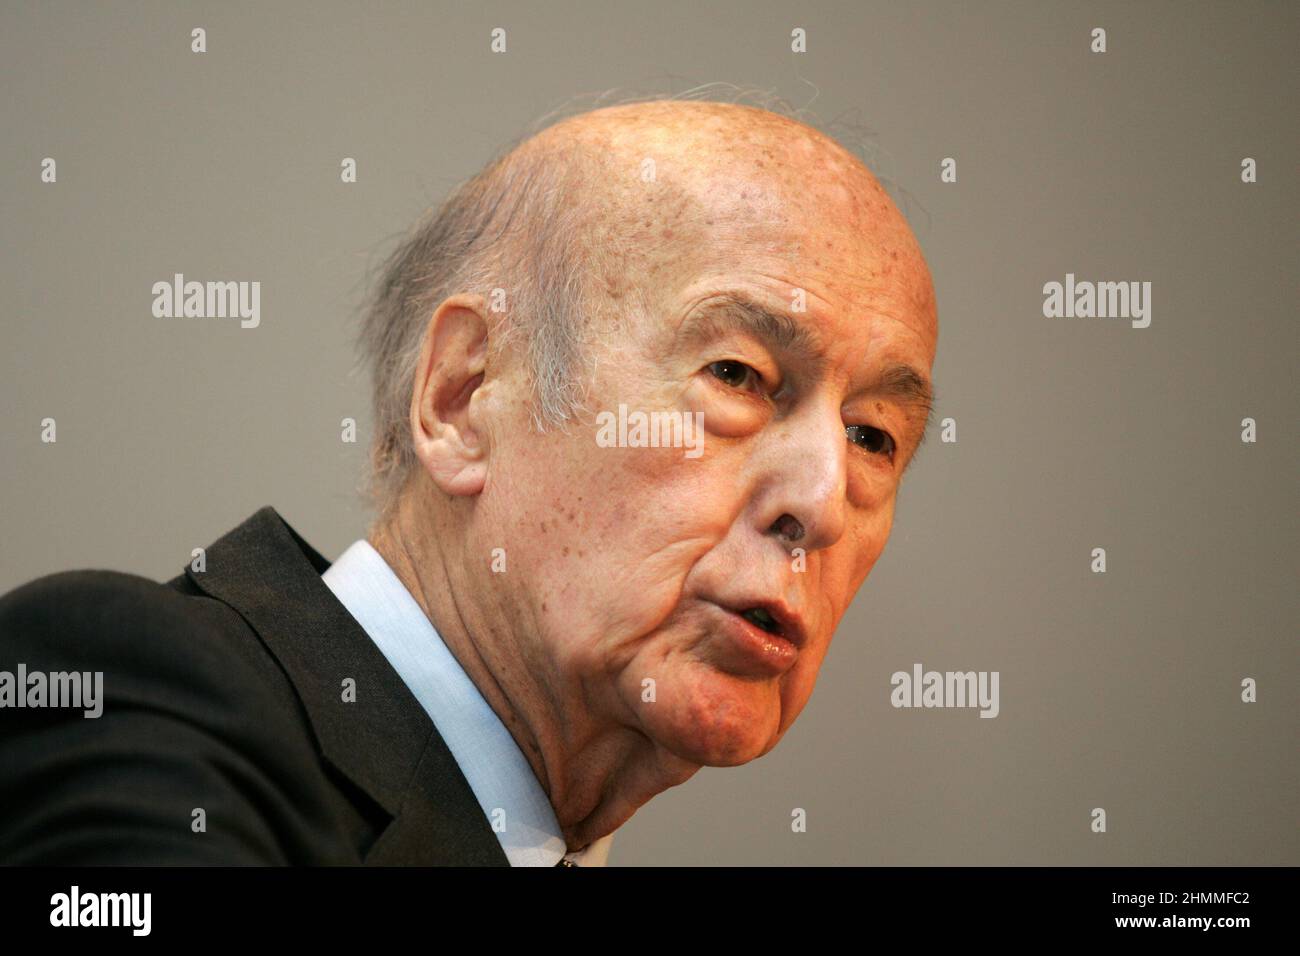 Angers (north-western France), on May 14, 2005: conference of former President of the French Republic Valery Giscard d'Estaing on the European Constitution, at the Business School Stock Photo